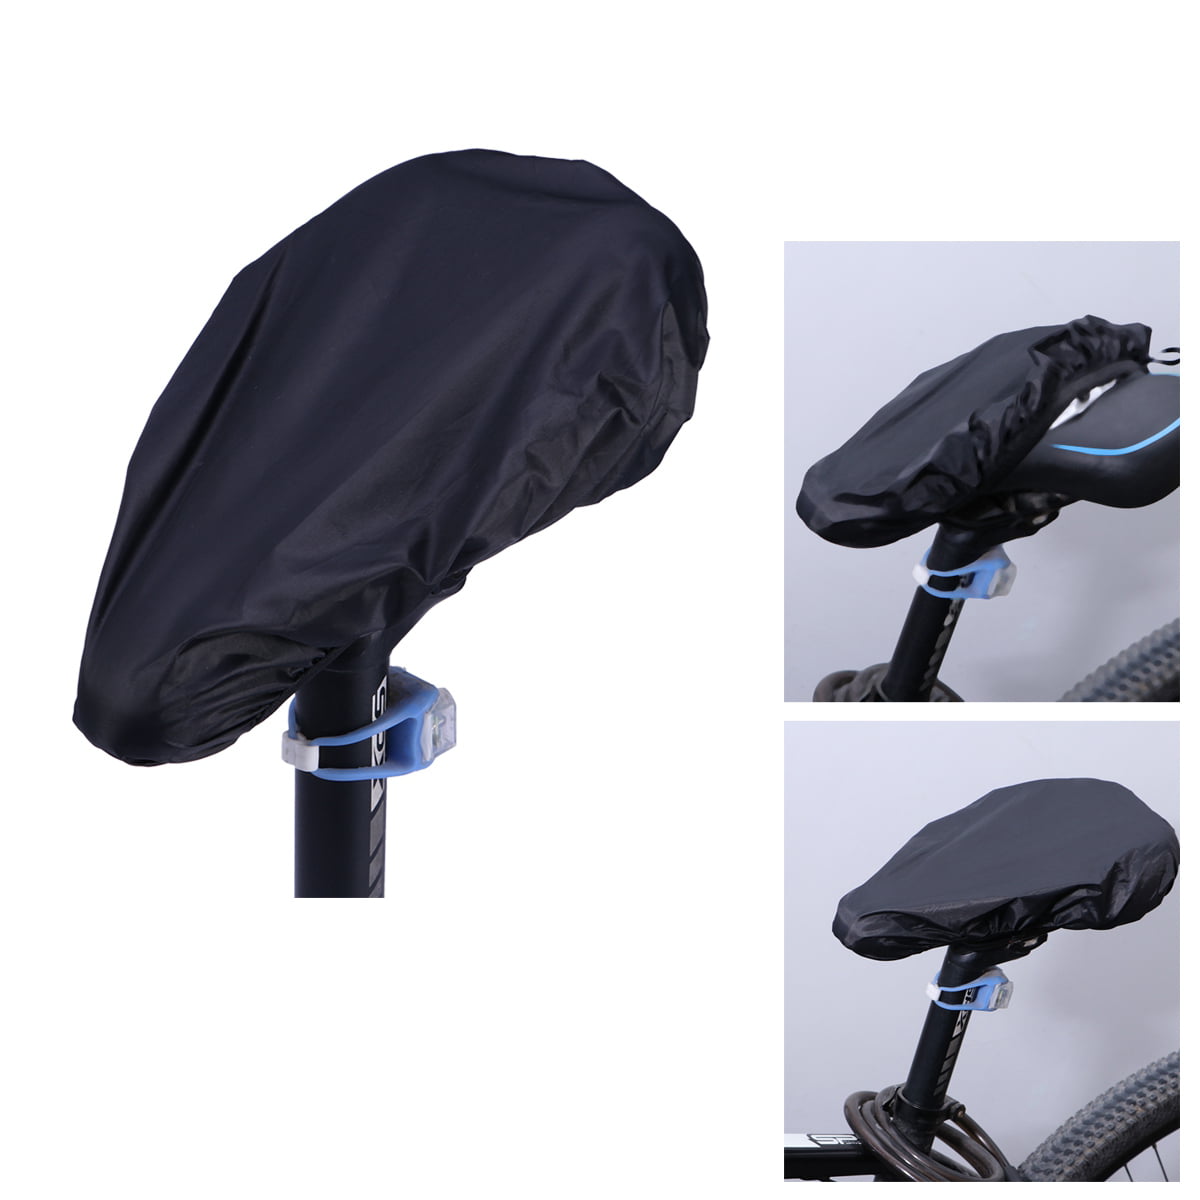 Tyouki Bike Seat Cover Extra Comfortable Bicycle Seat with Soft sponge Cycle Saddle Cushion Bicycle Pad Cover Saddle Covers-Perfect for Most Narrow Bike Seats,Exercise Bike/Road Mountain Bike